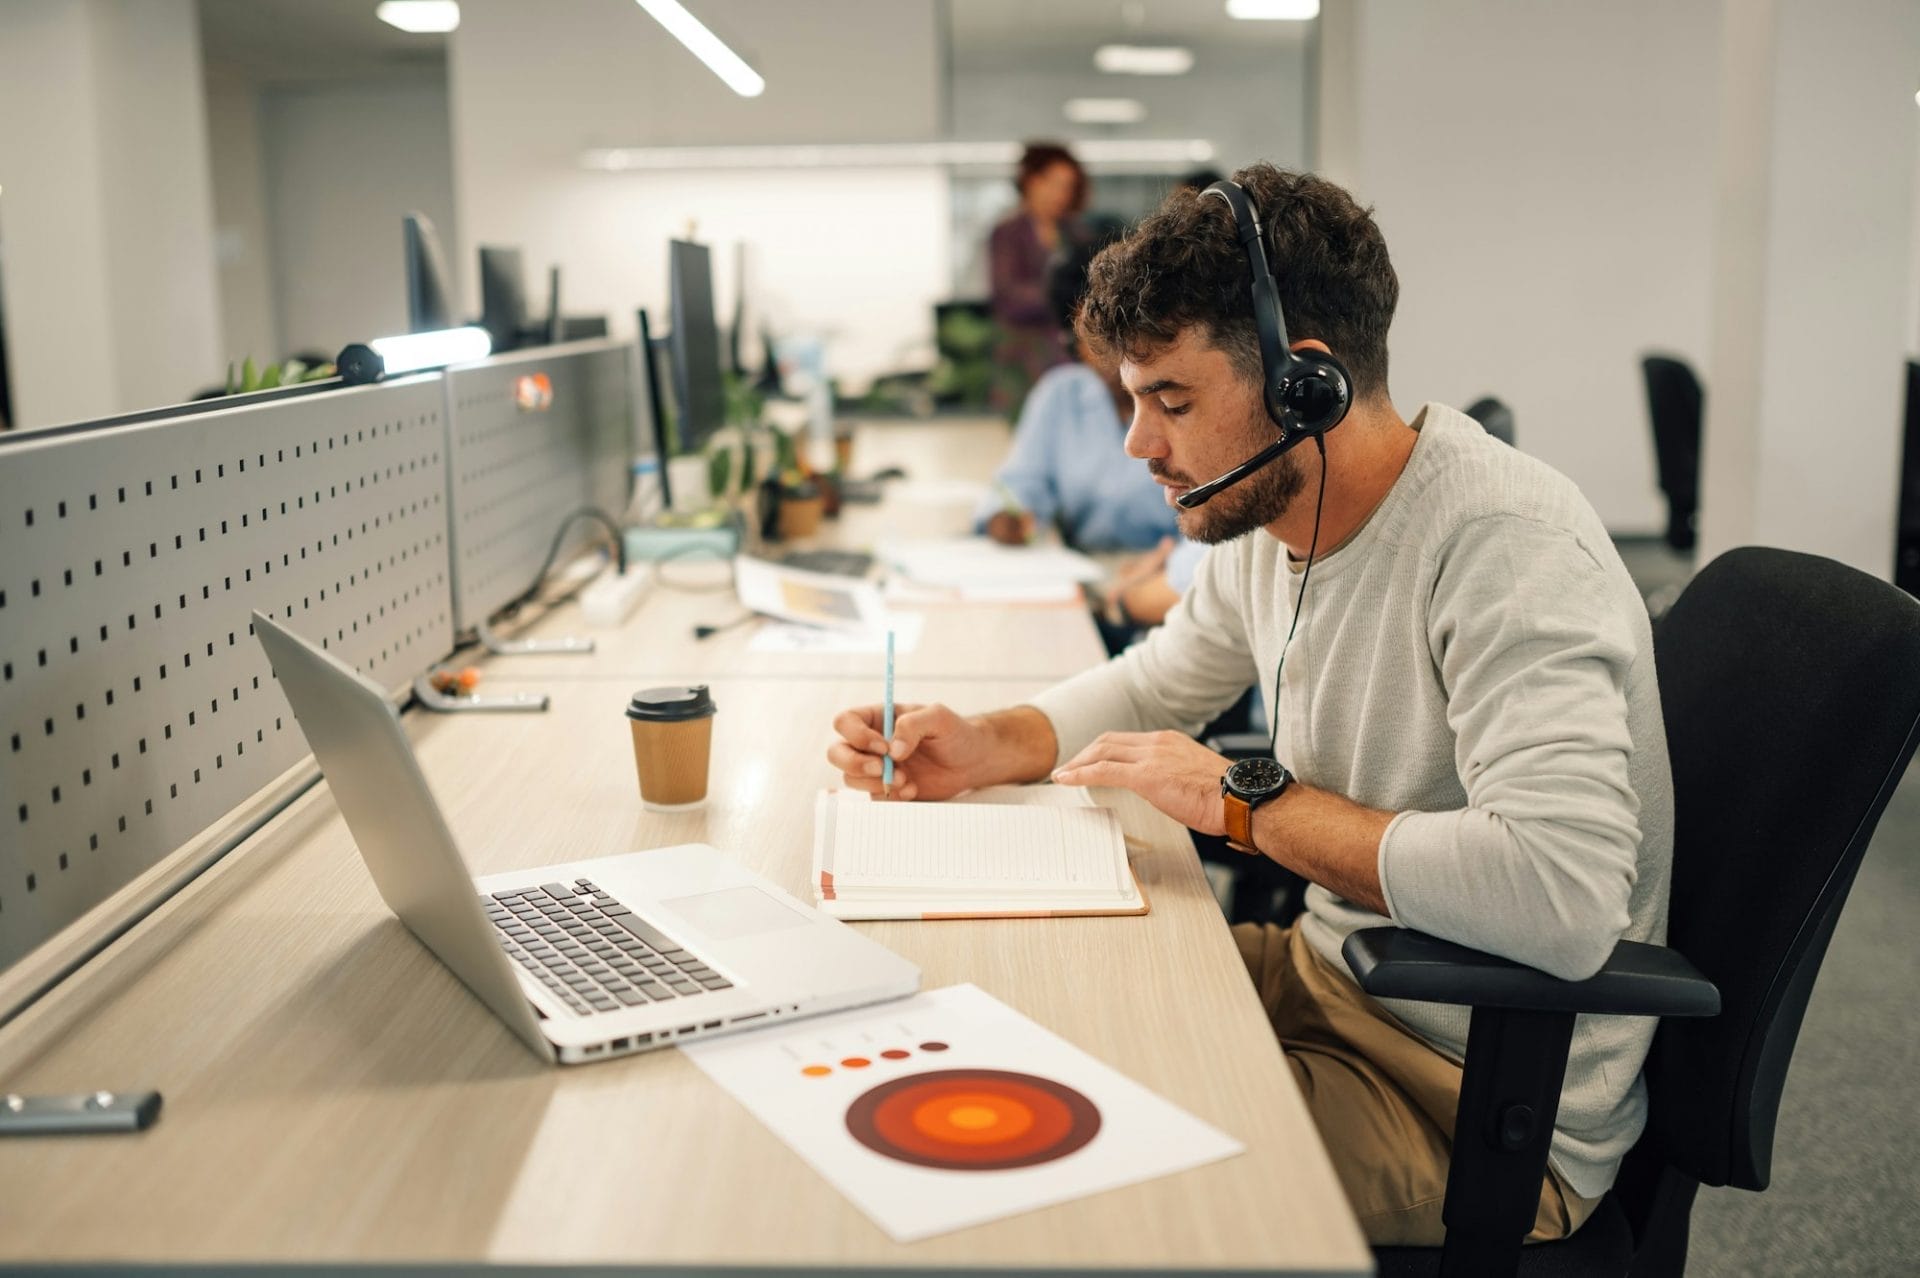 Customer services agent with headset writing notes in a call center